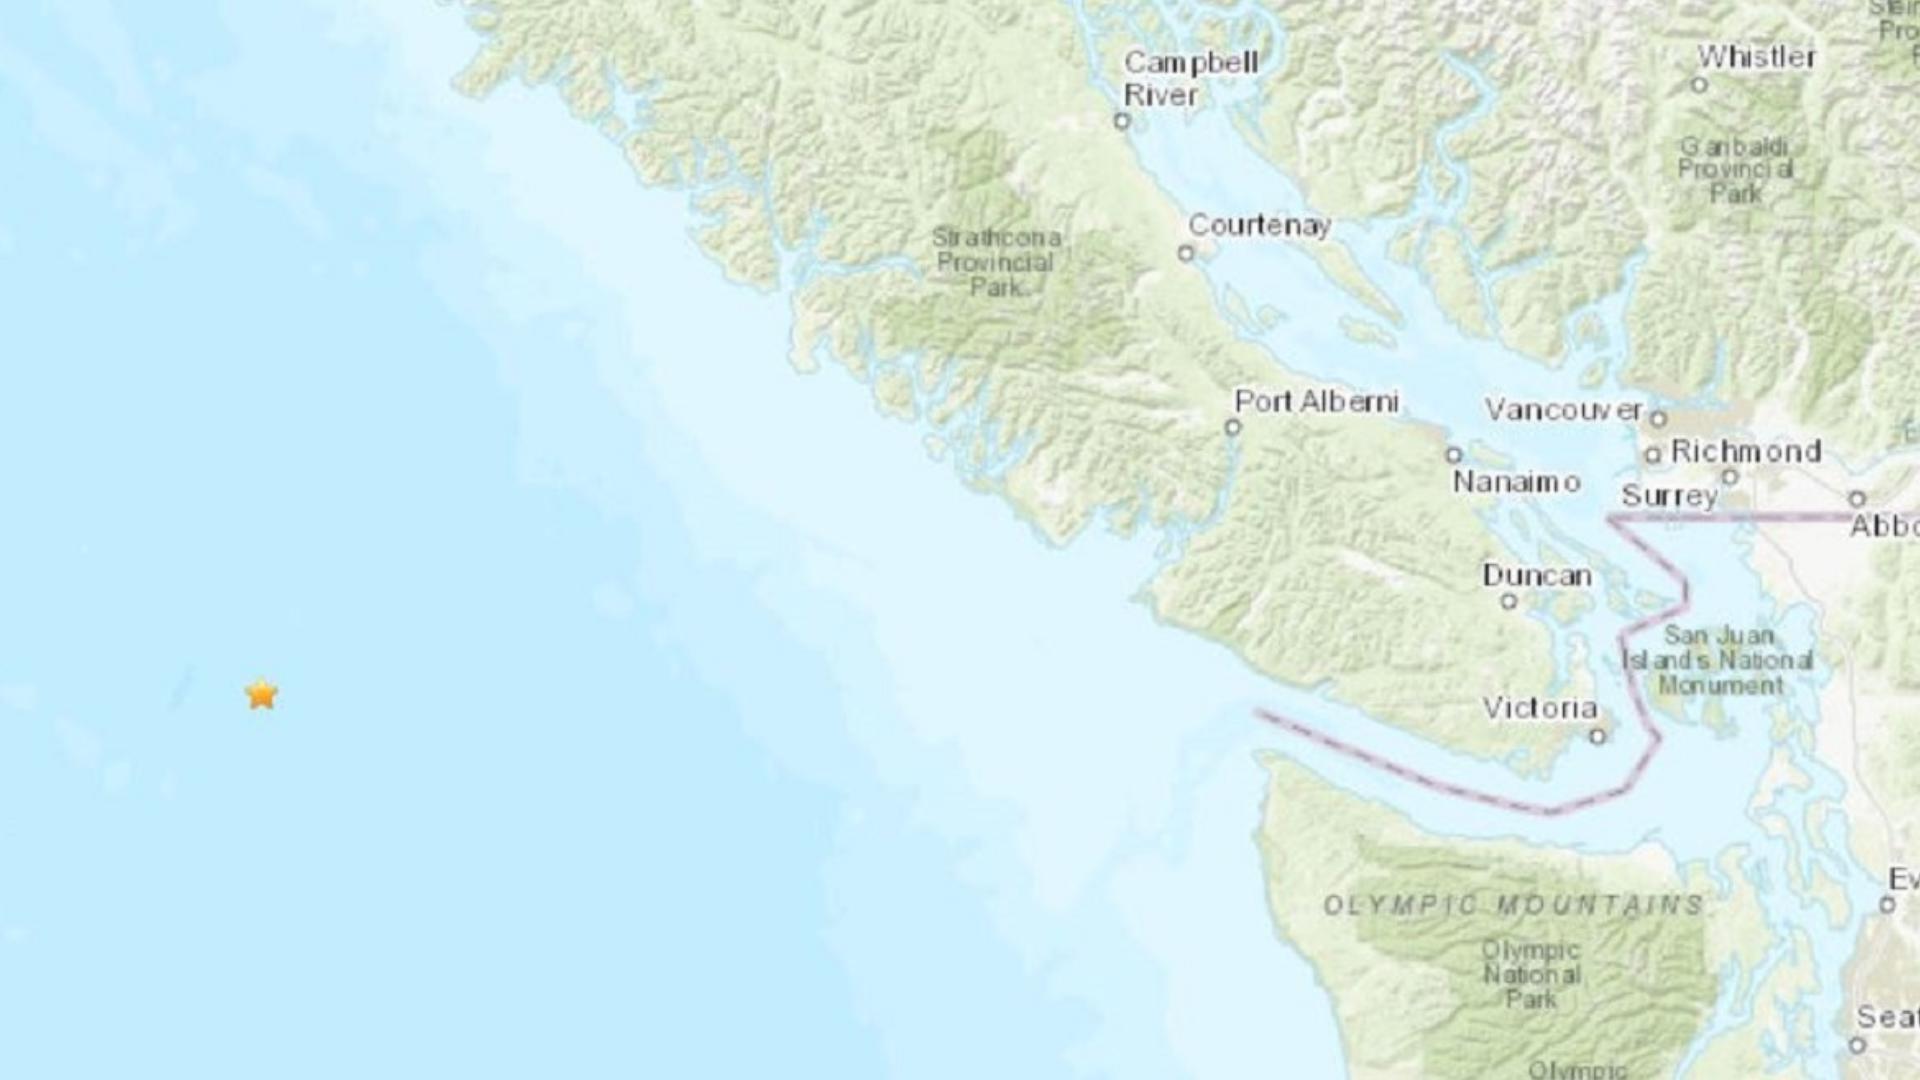 A 5.7-magnitude earthquake struck off the coast of Vancouver Island on Thursday morning, just a day after a 4.4-magnitude quake hit in a nearby area.